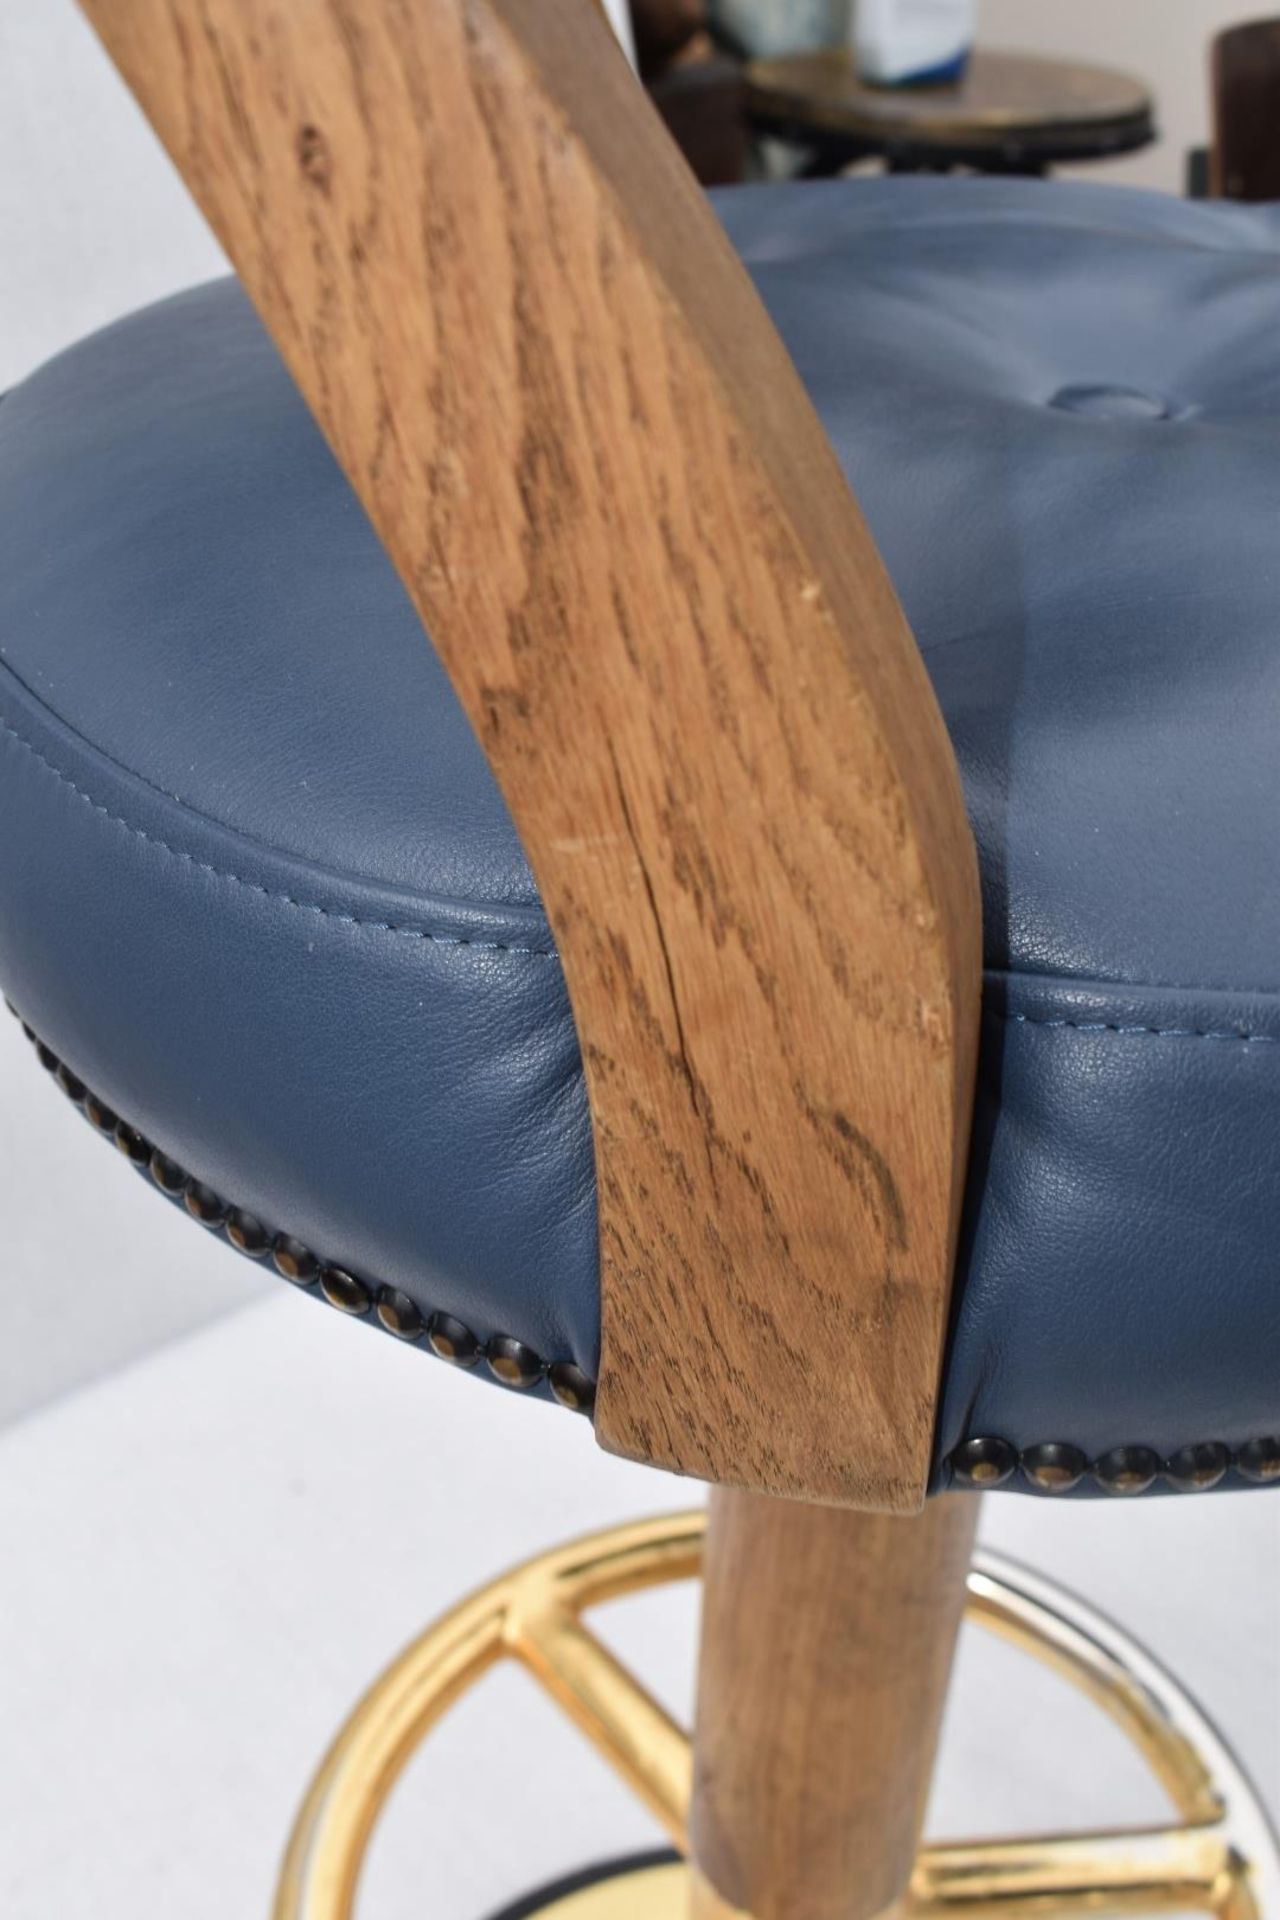 1 x Luxury Buttoned Bar Stool with Wooden Frame, Metal Base, Footrest and Studded Upholstery in a - Image 8 of 8